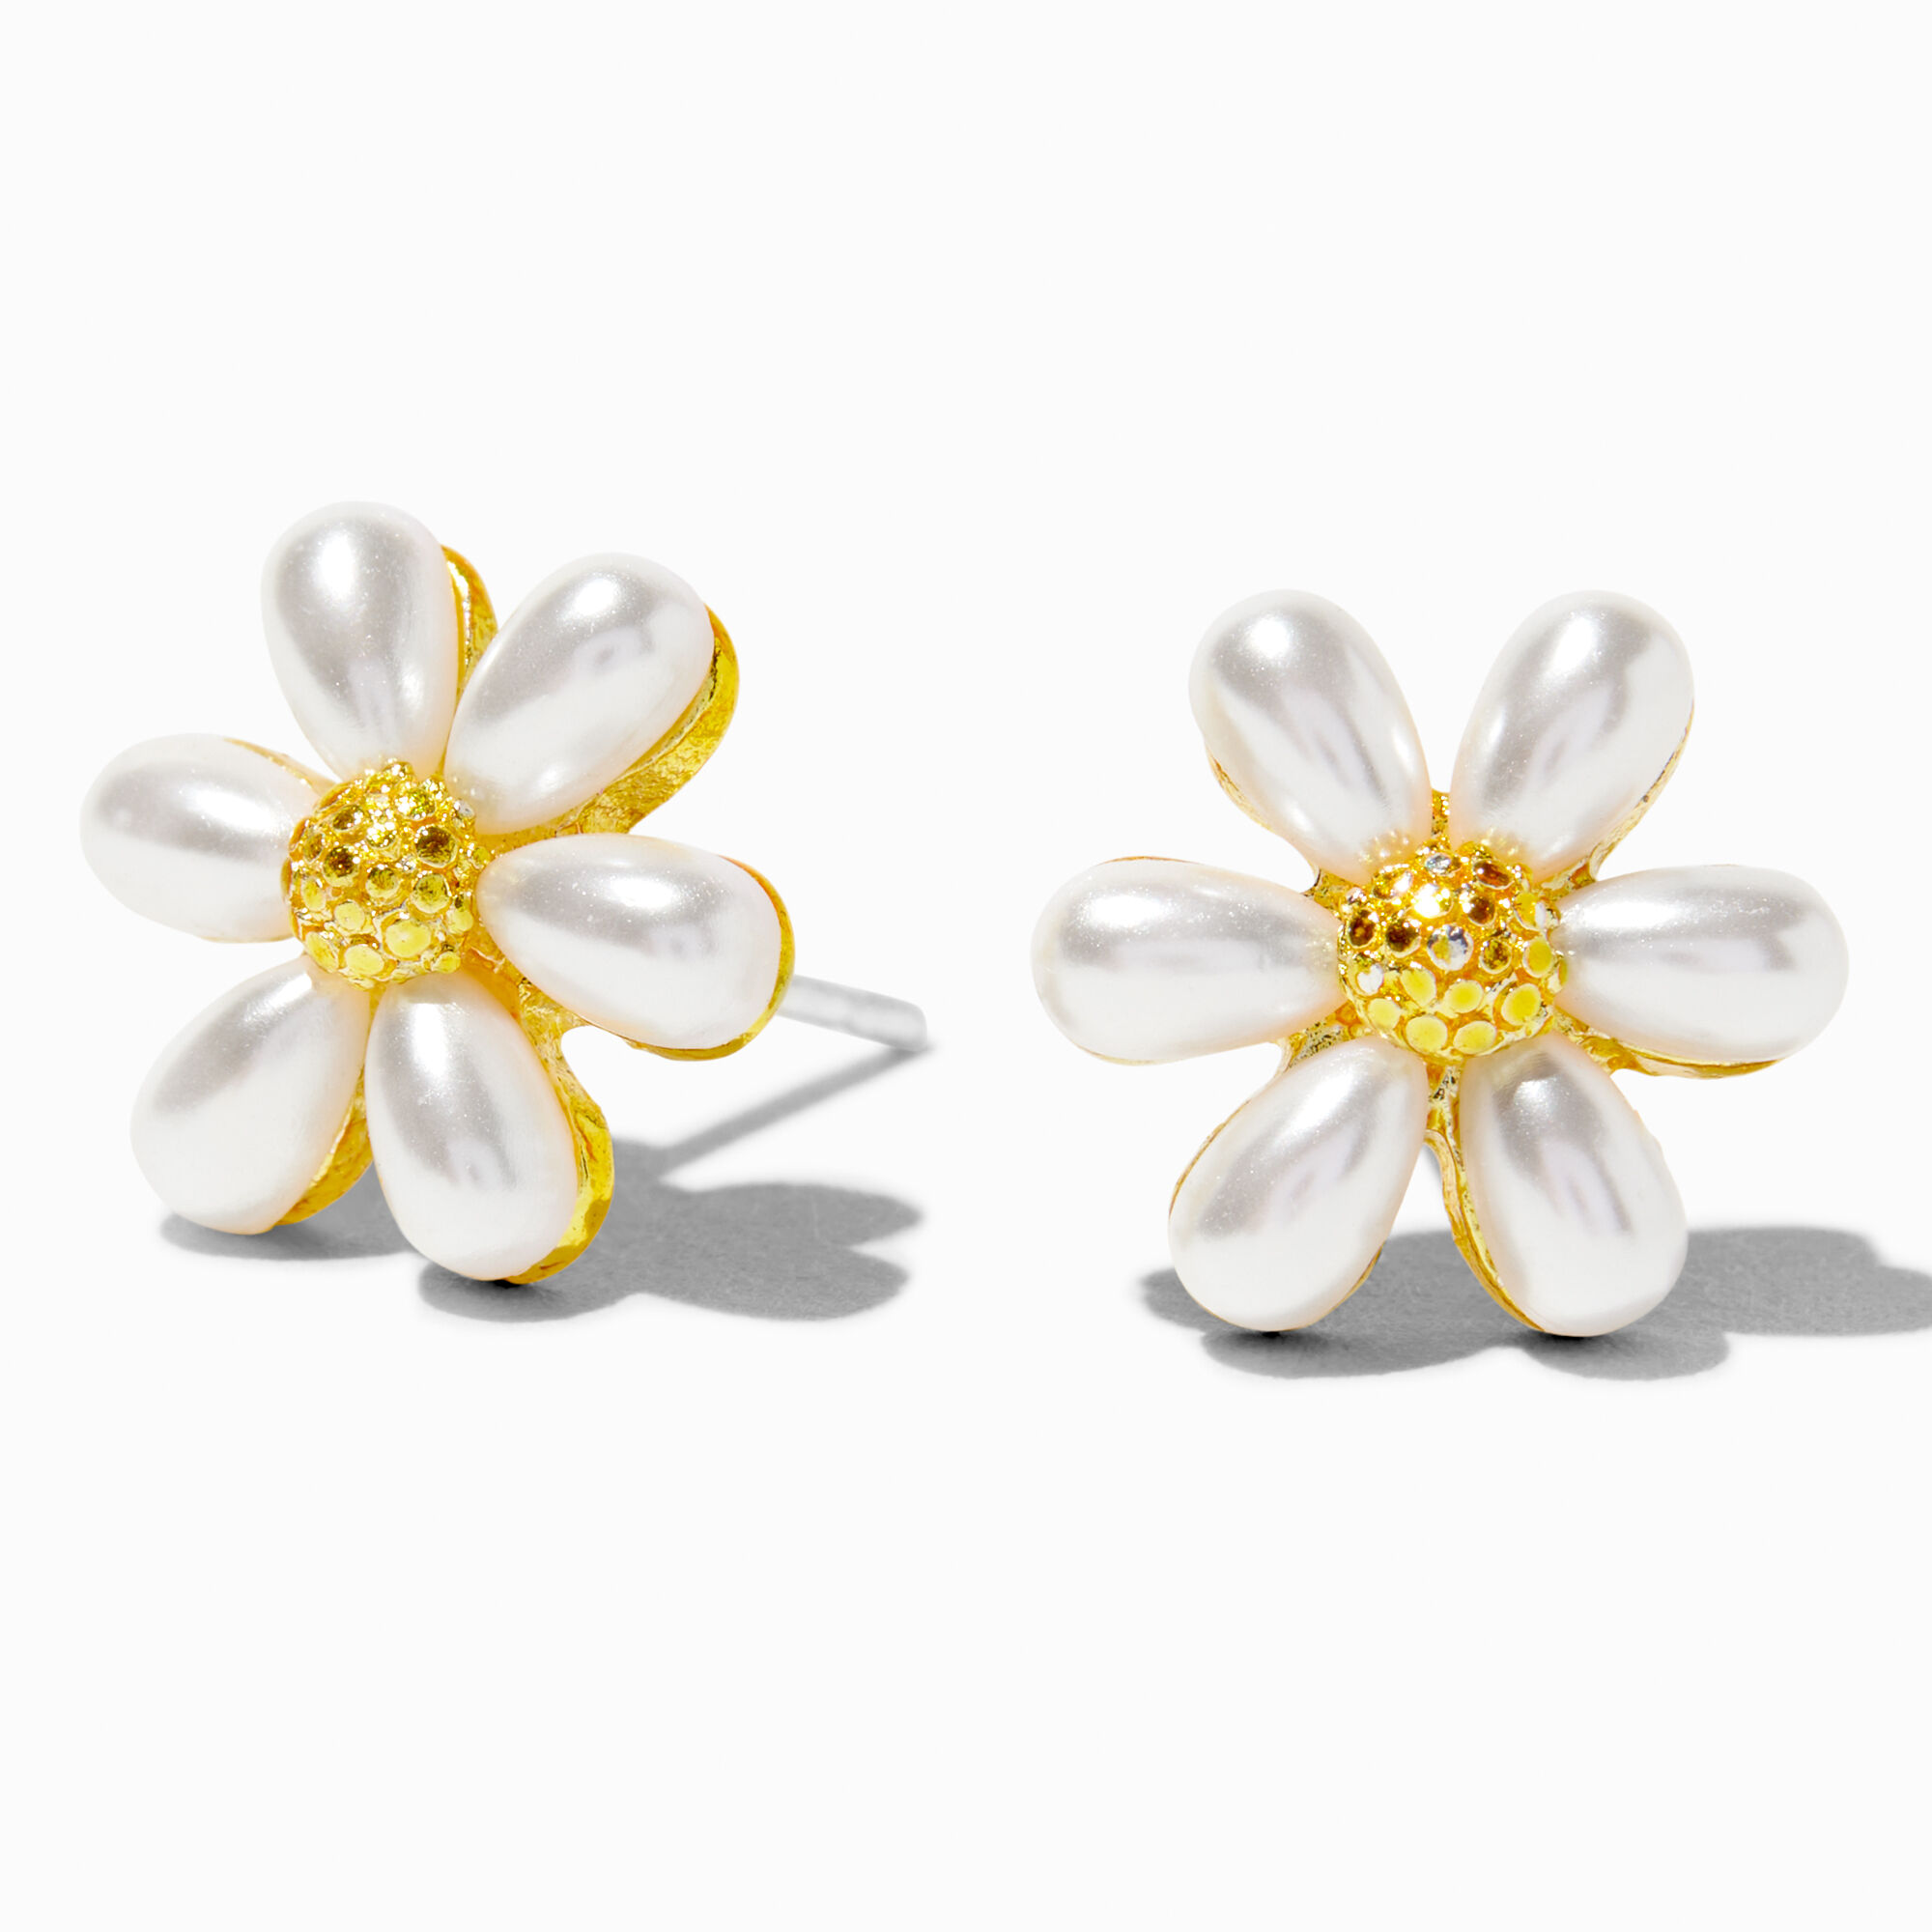 View Claires Tone Pearl Daisy Stud Earrings Gold information